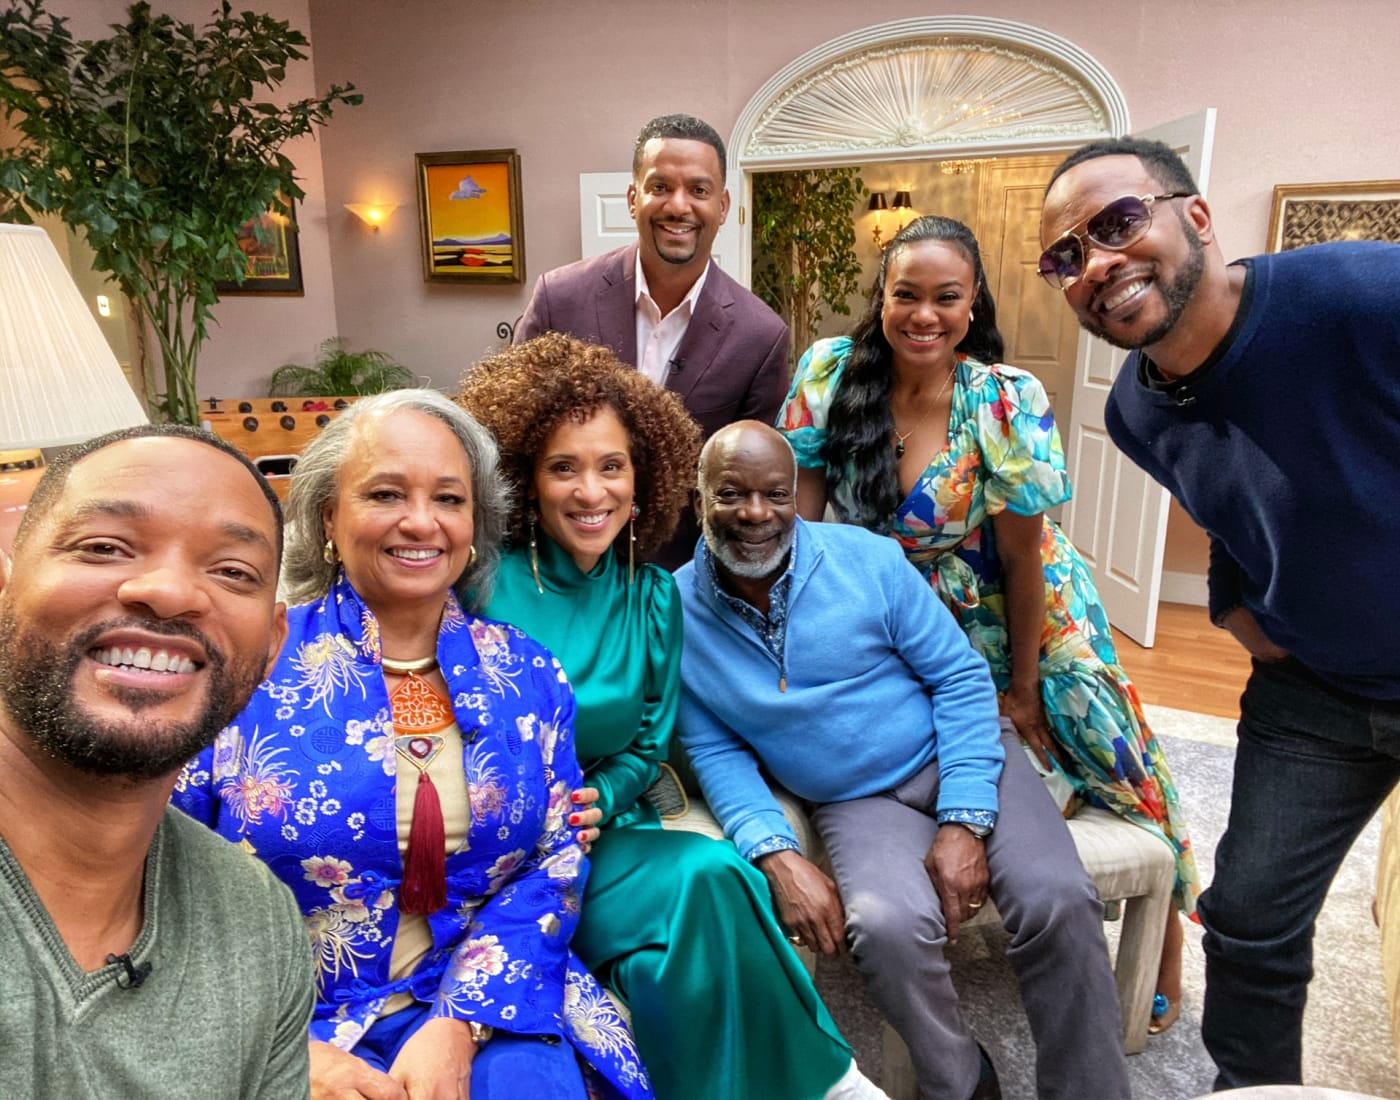 The cast of 'The Fresh Prince of Bel Air'